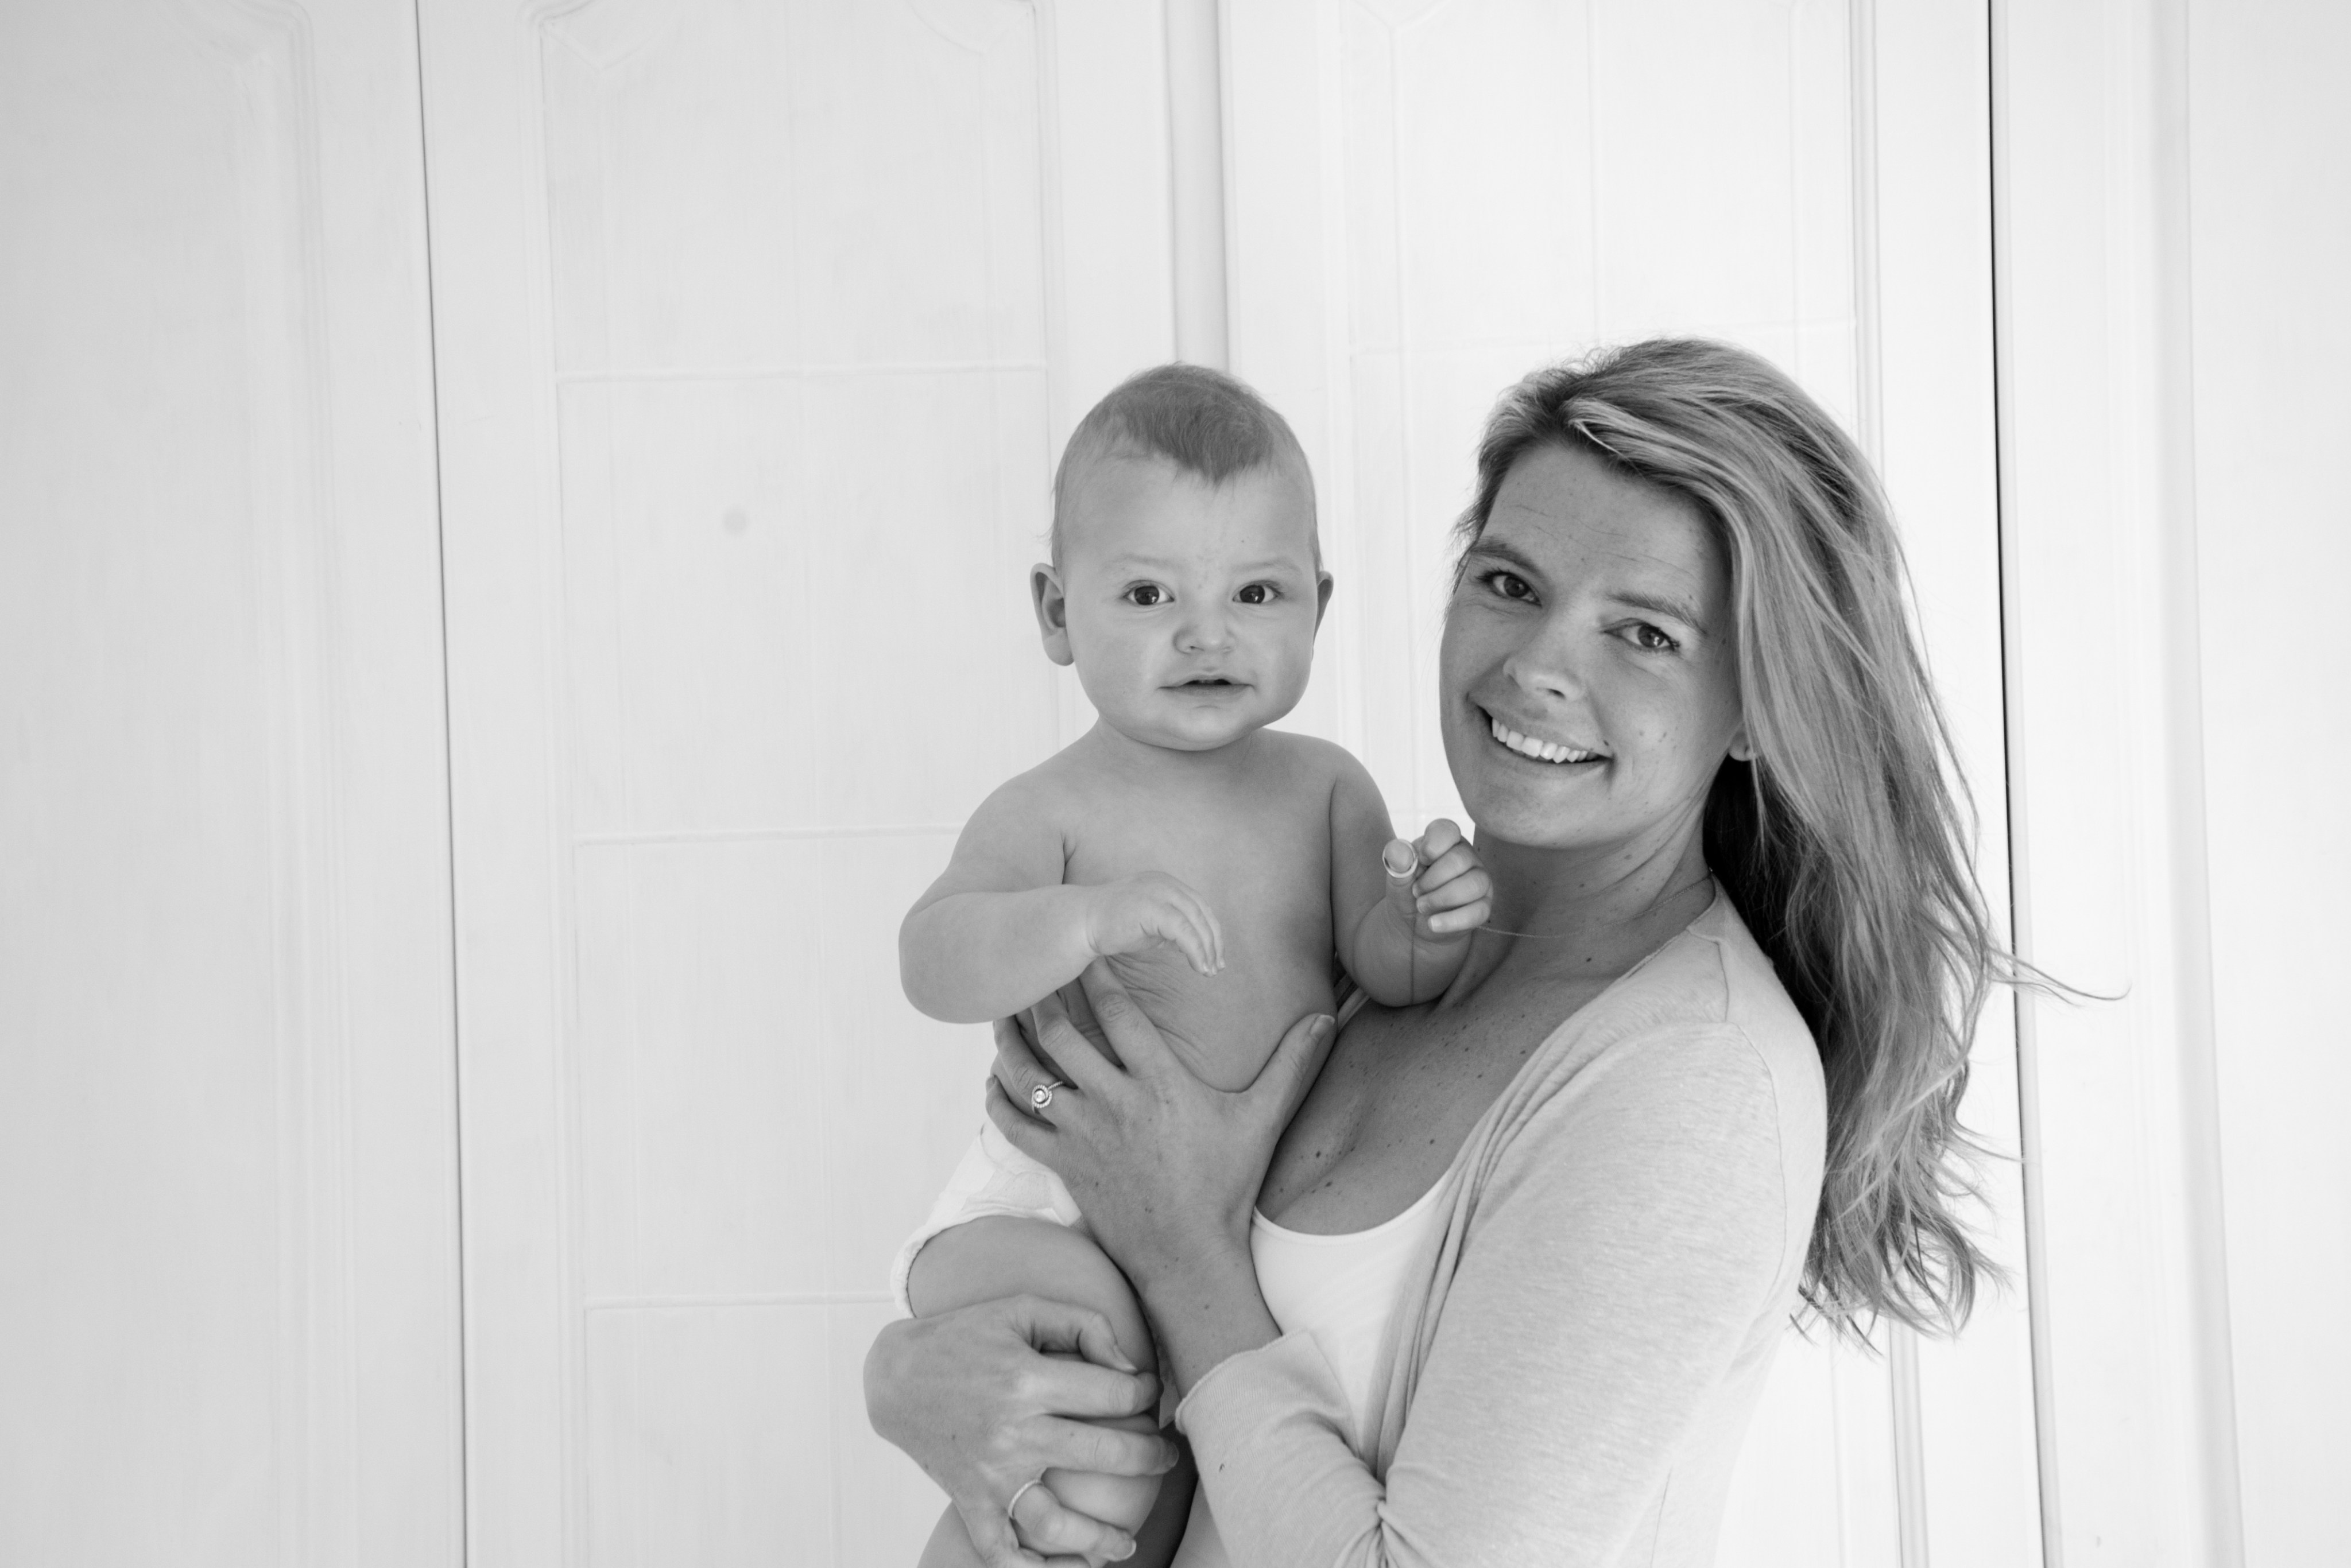 Victoria Warnes with her son Wills in 2017. She now helps new parents prepare for having a baby with antenatal classes delivered through Our Baby Club, the platform she founded. Photo: Victoria Warnes